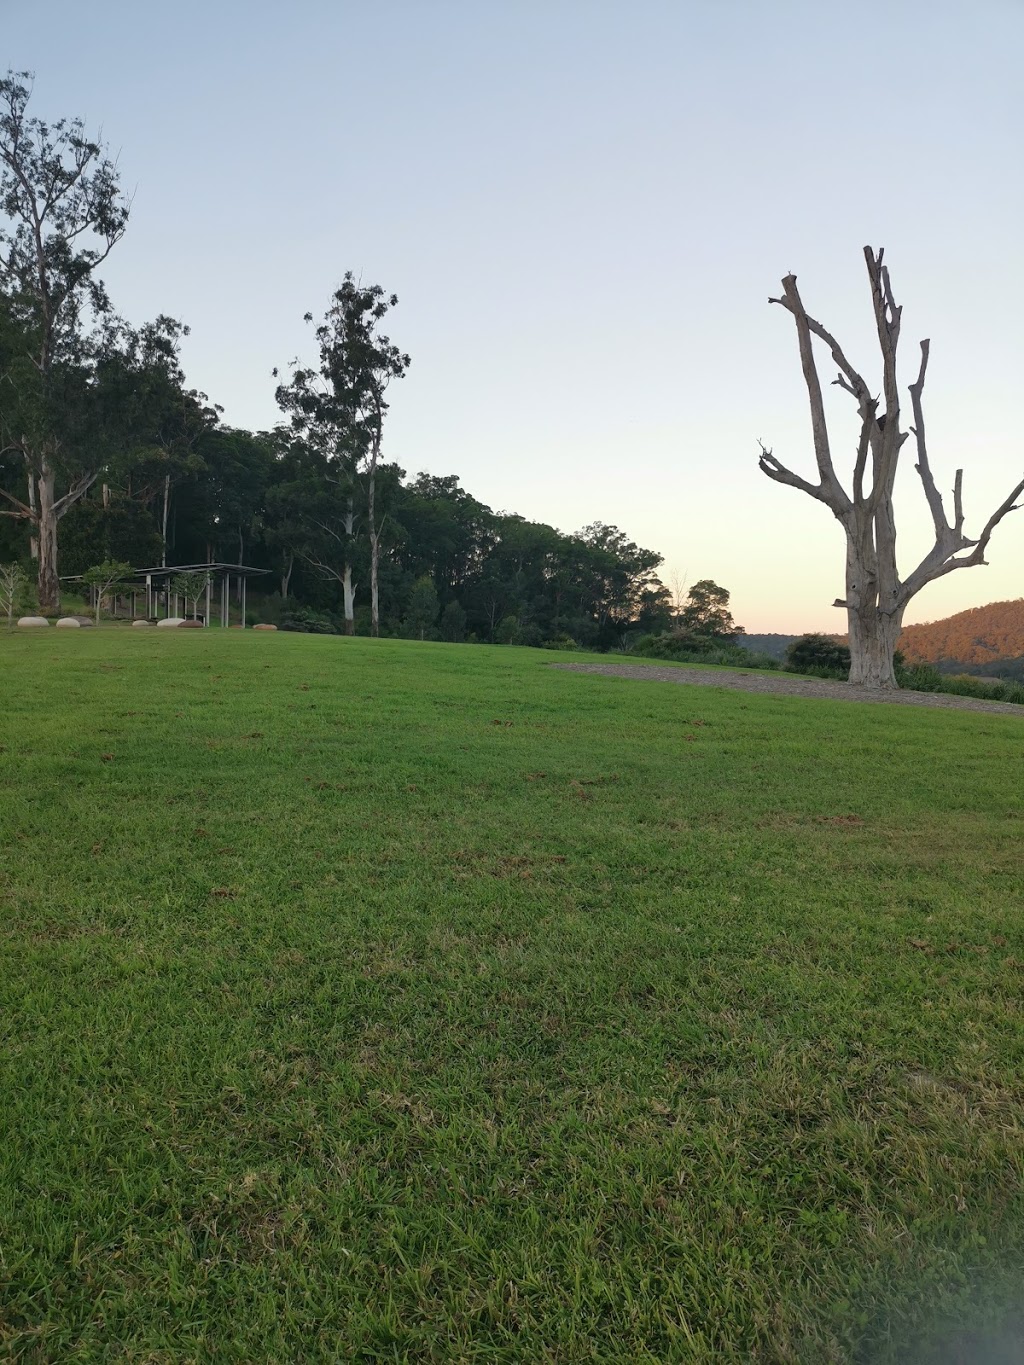 The GroundsKeepers |  | 22 Rivermill Terrace, Maudsland QLD 4210, Australia | 0438538487 OR +61 438 538 487